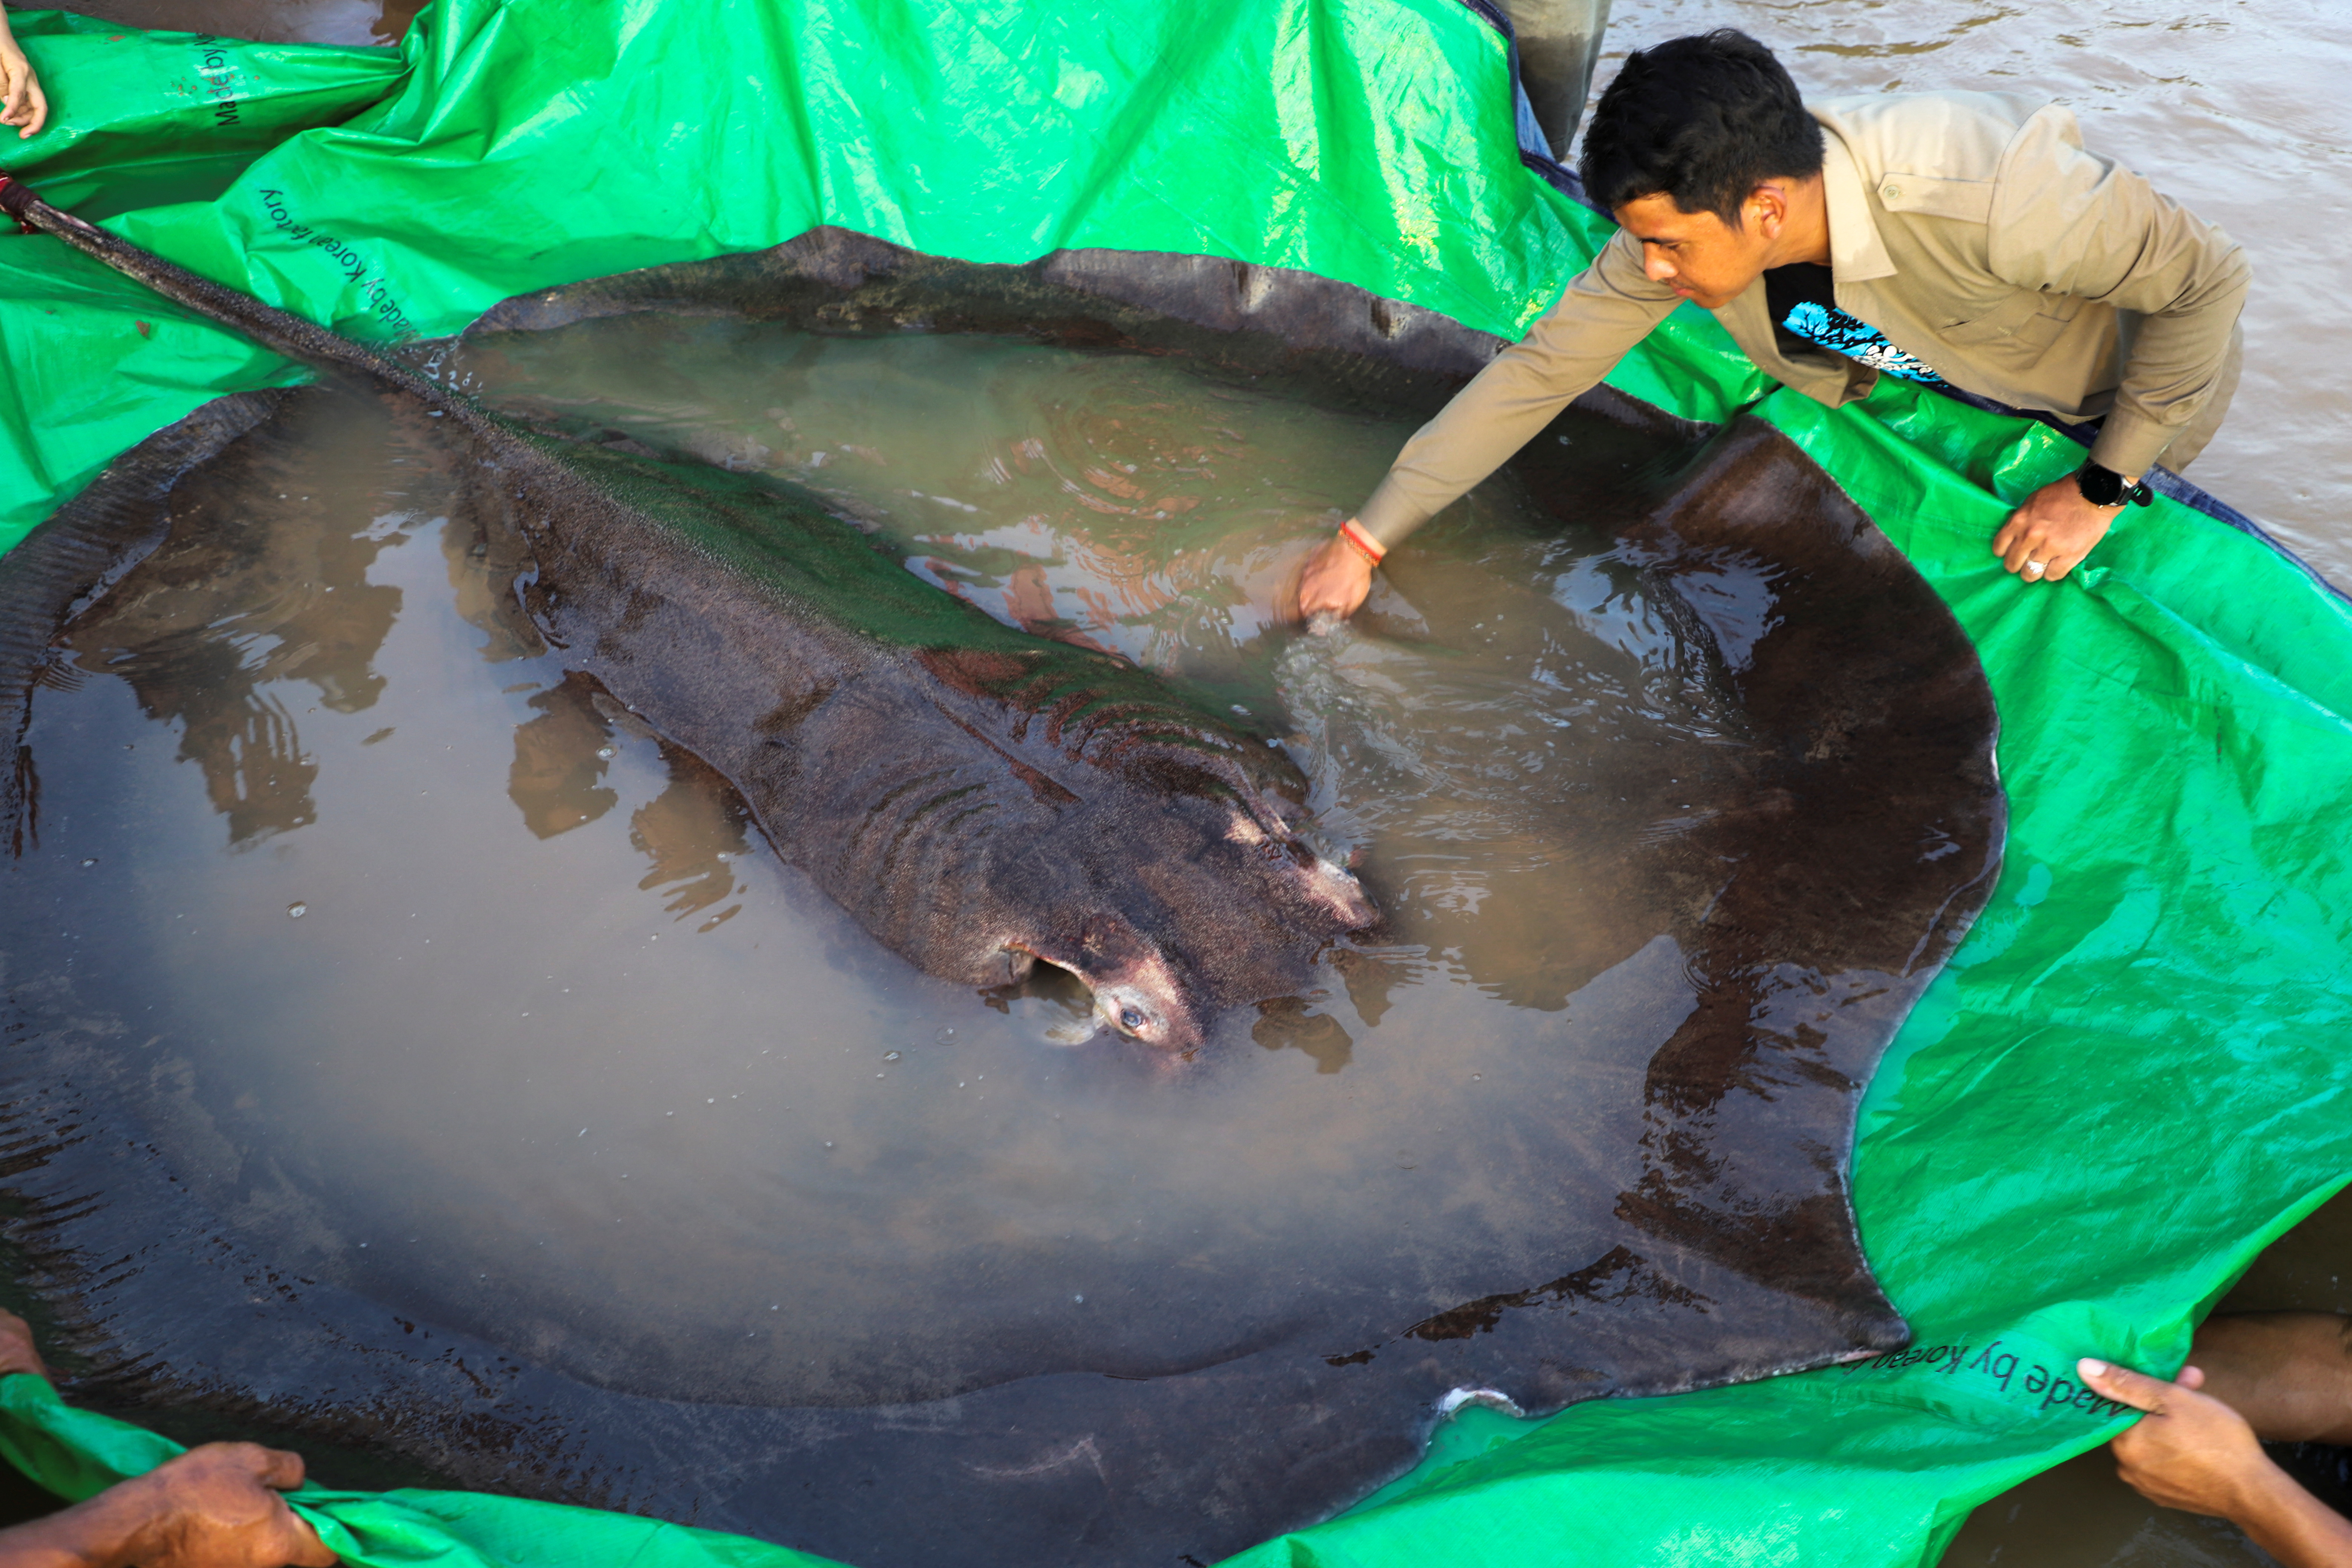 Scientists say they found world's largest freshwater fish in Mekong